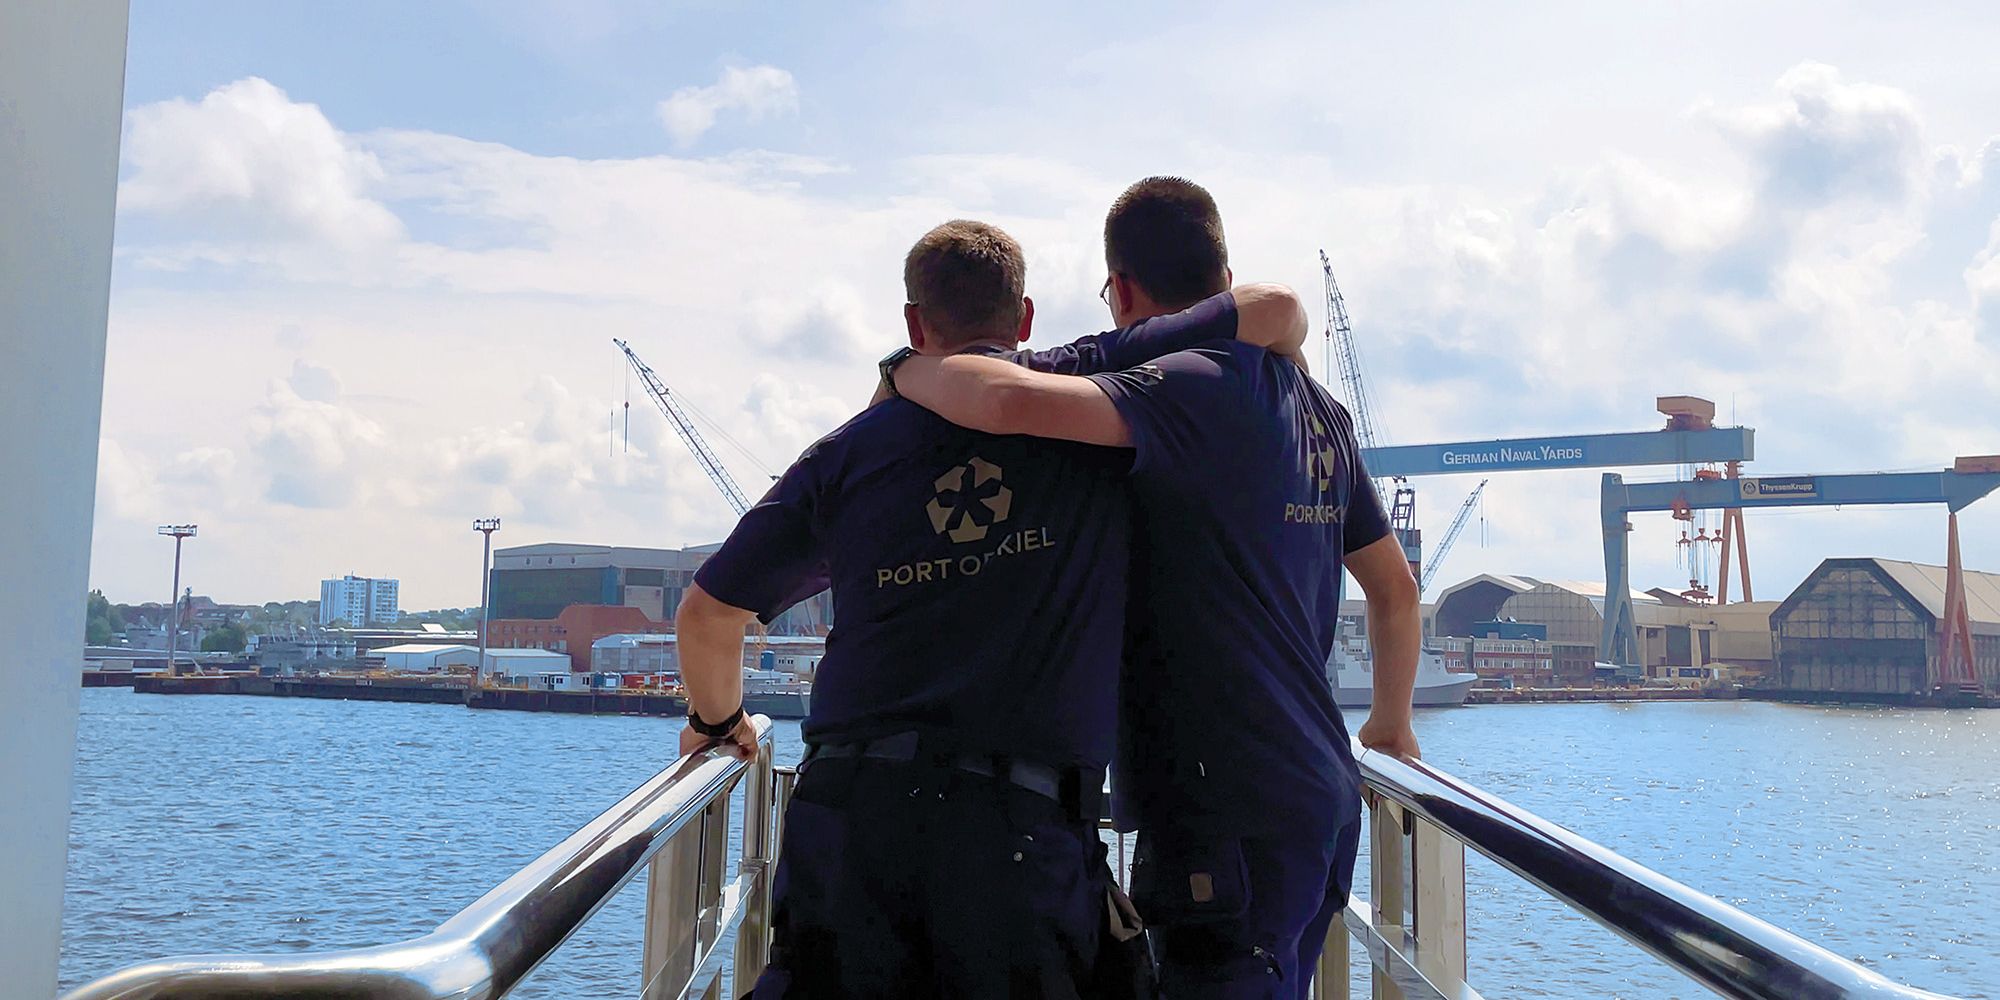 Two employees look at the port of Kiel